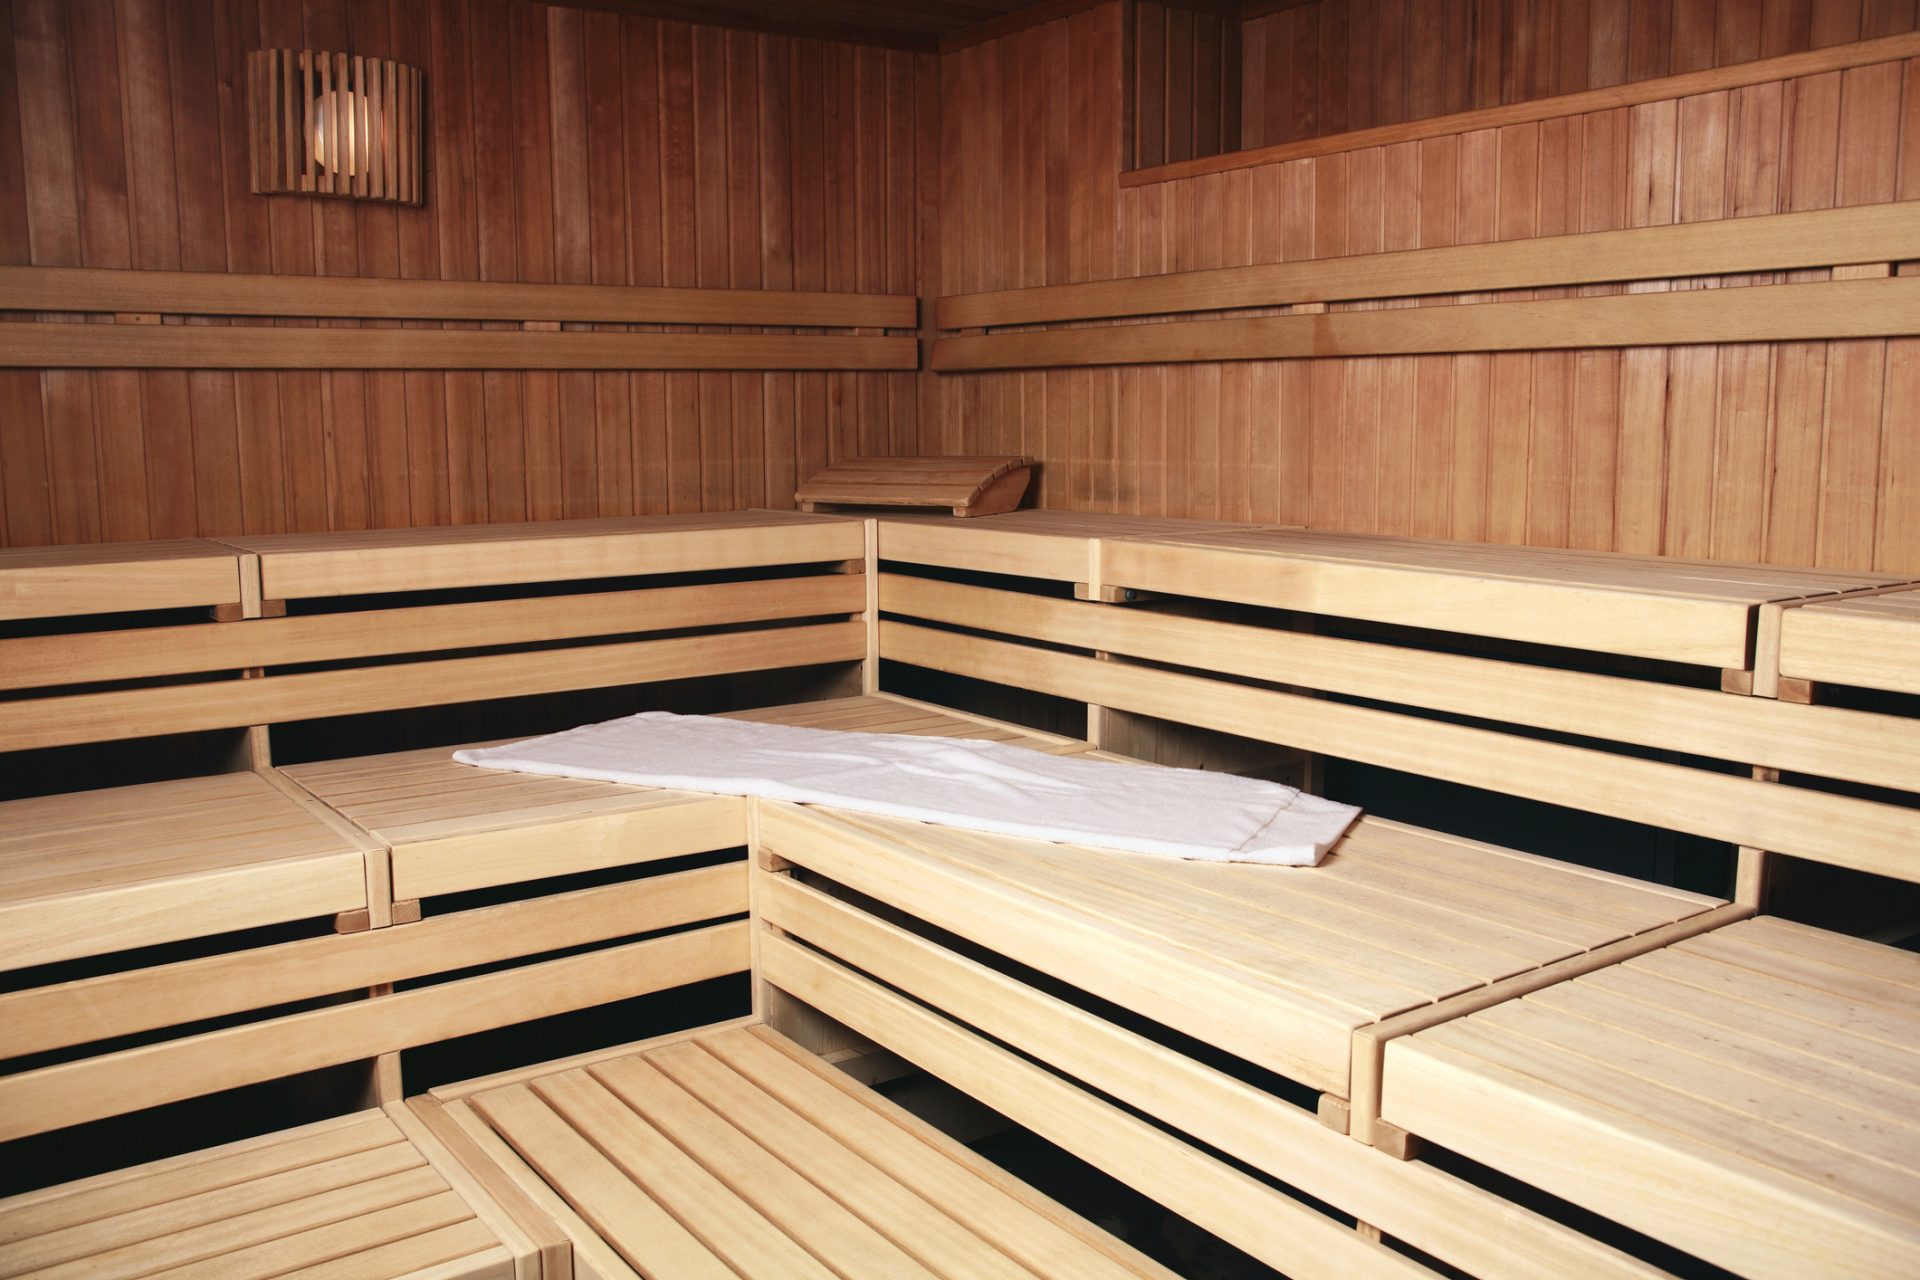 Researcher finds that saunas are amazing for your health